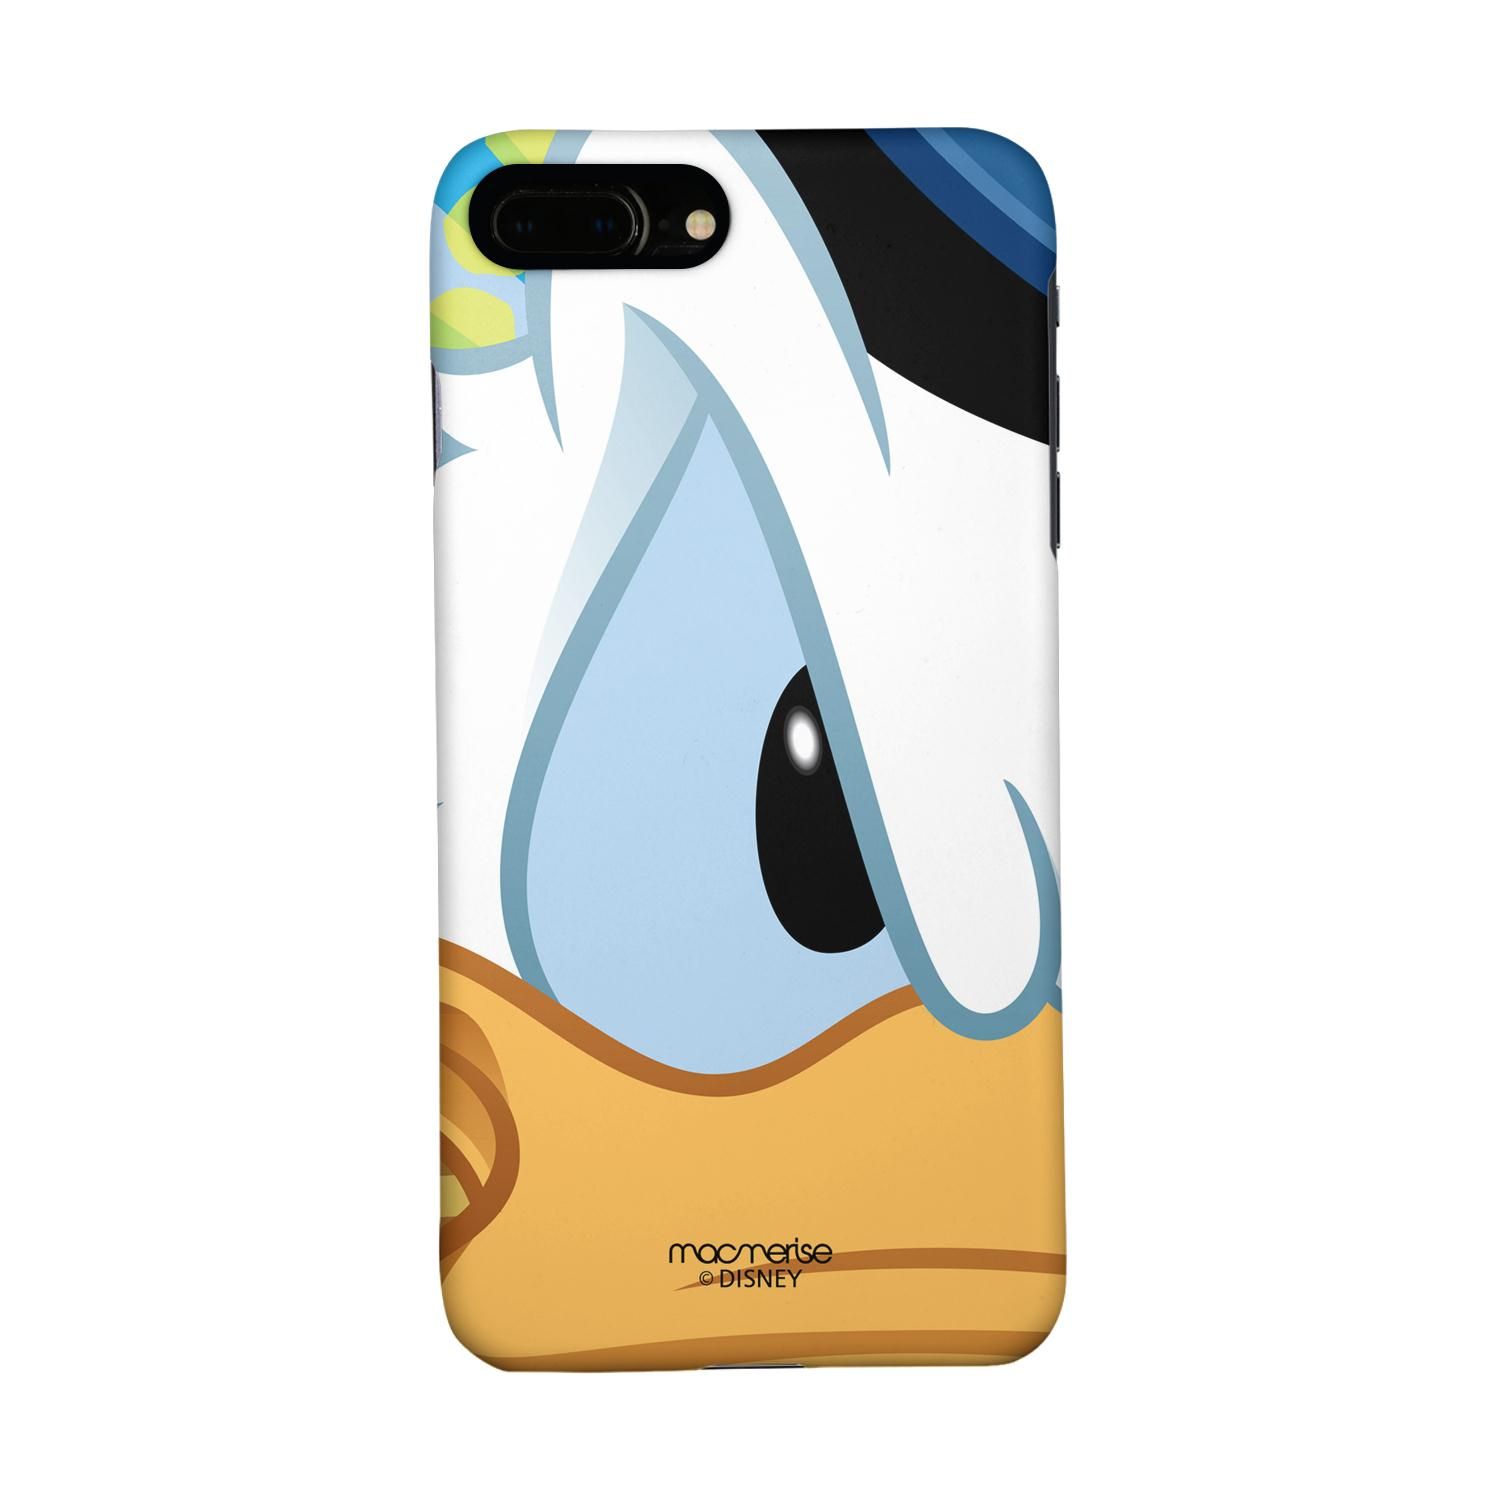 Buy Zoom Up Donald - Sleek Phone Case for iPhone 7 Plus Online